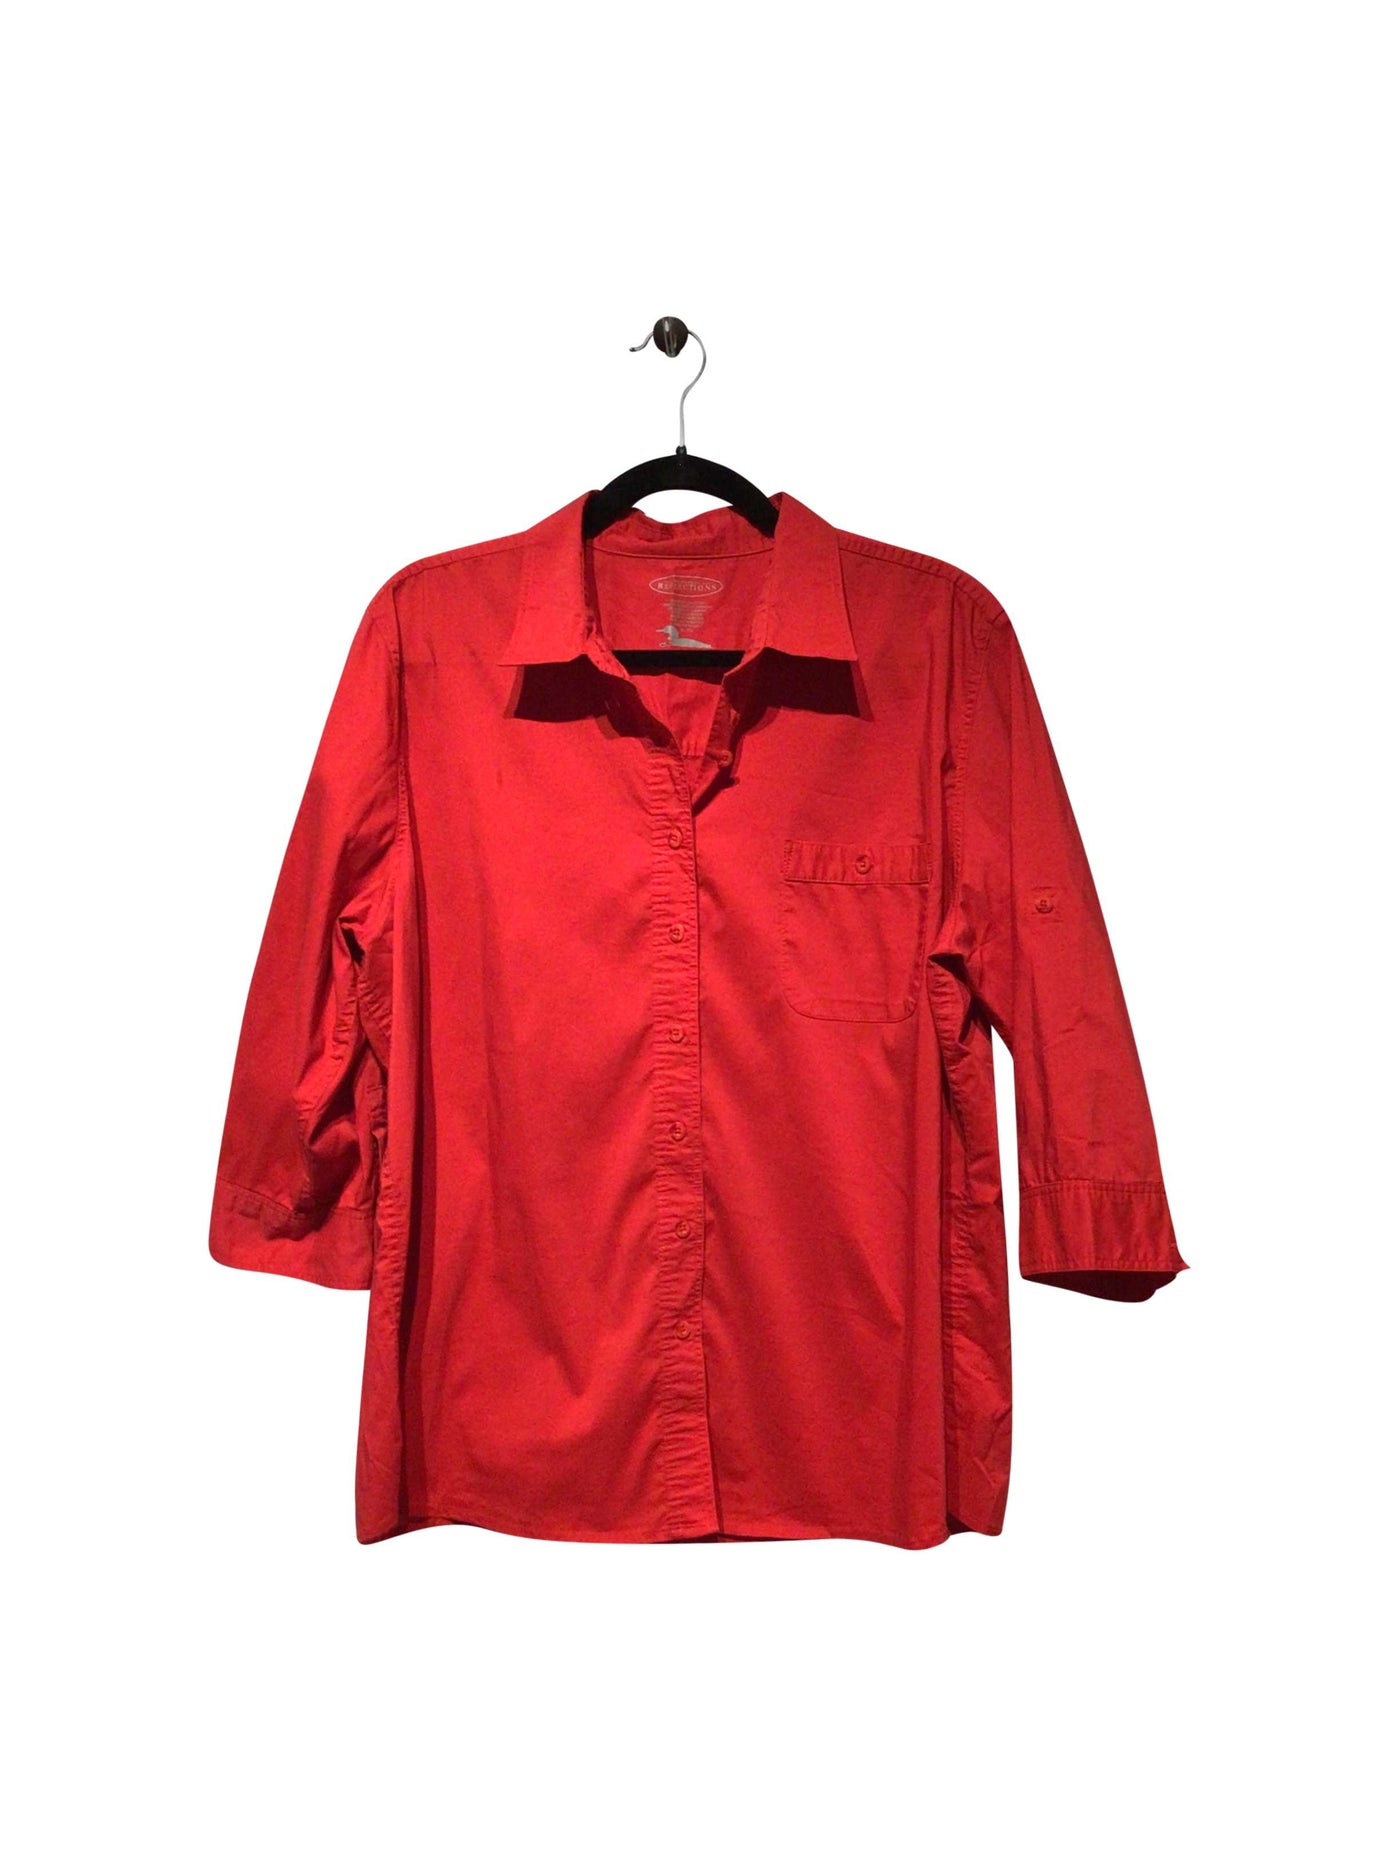 NORTHERN REFLECTIONS Regular fit Button-down Top in Red  -  XL  23.99 Koop